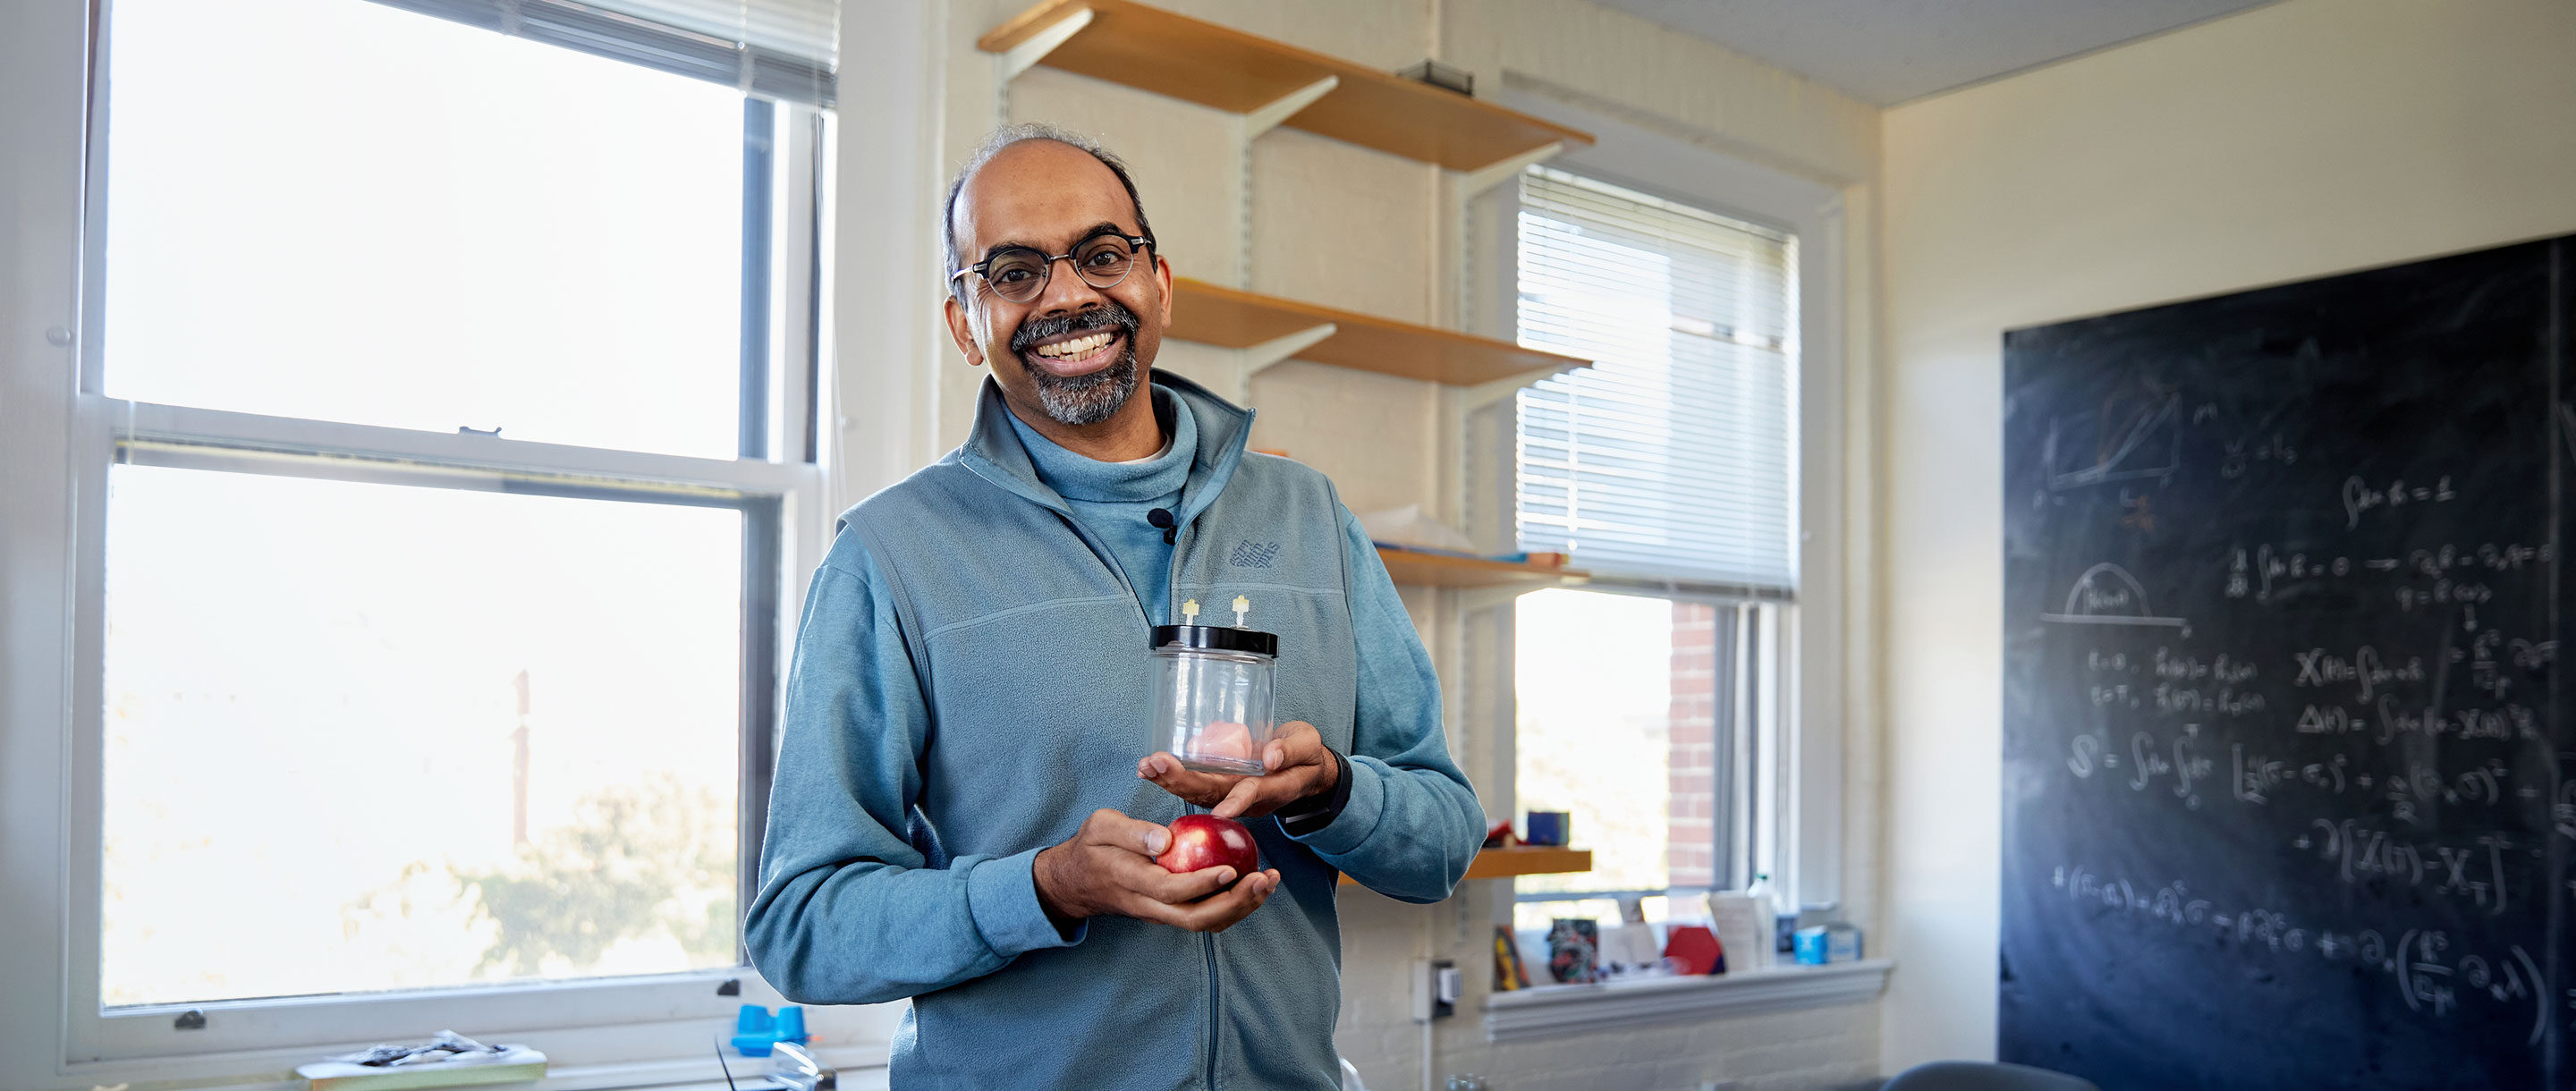 Harvard professor L. Mahadevan stands in a slightly cluttered office, holding an apple and a jar containing a miniature brain